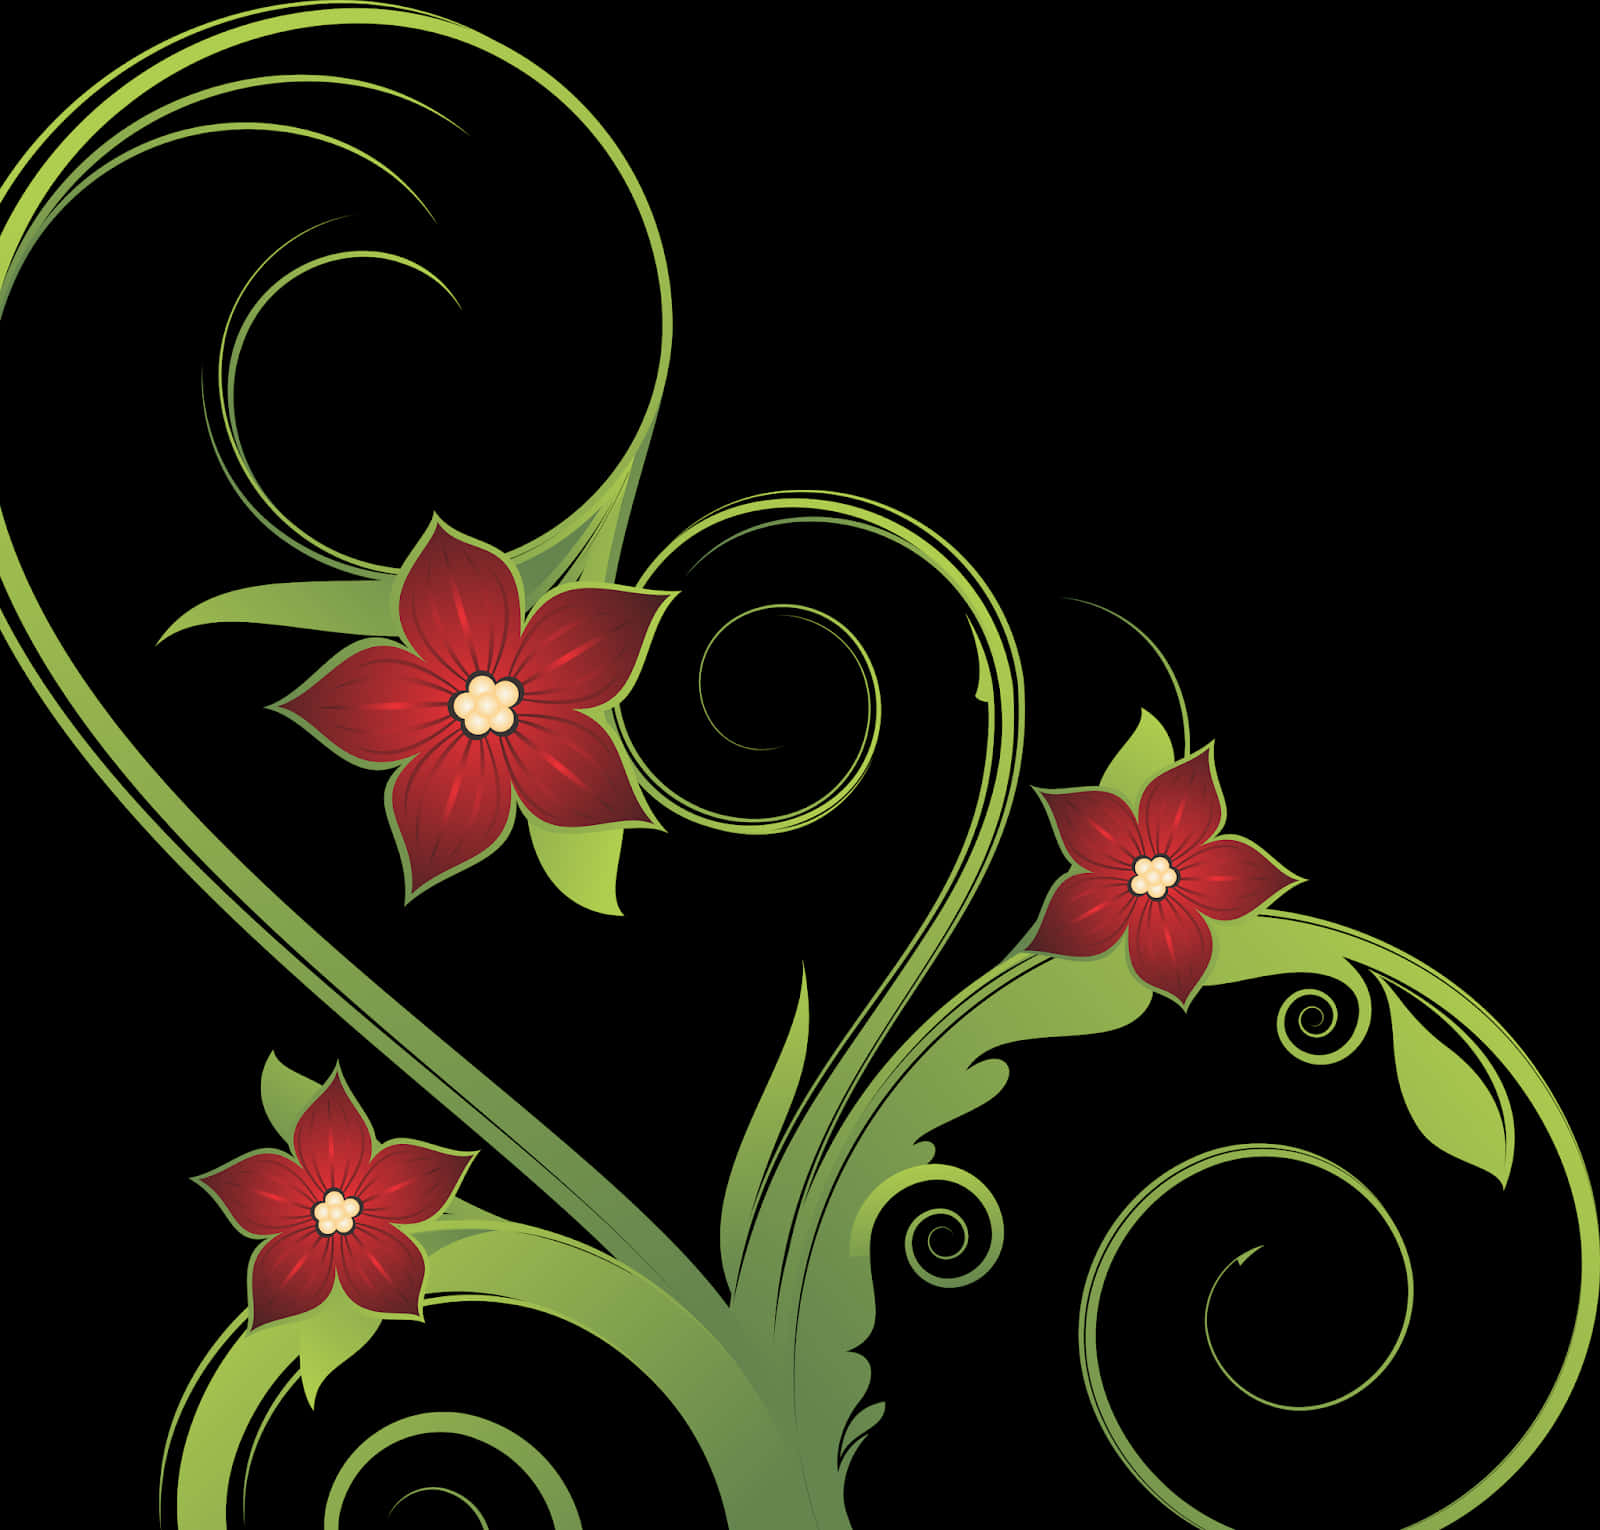 A Green And Red Flower Design